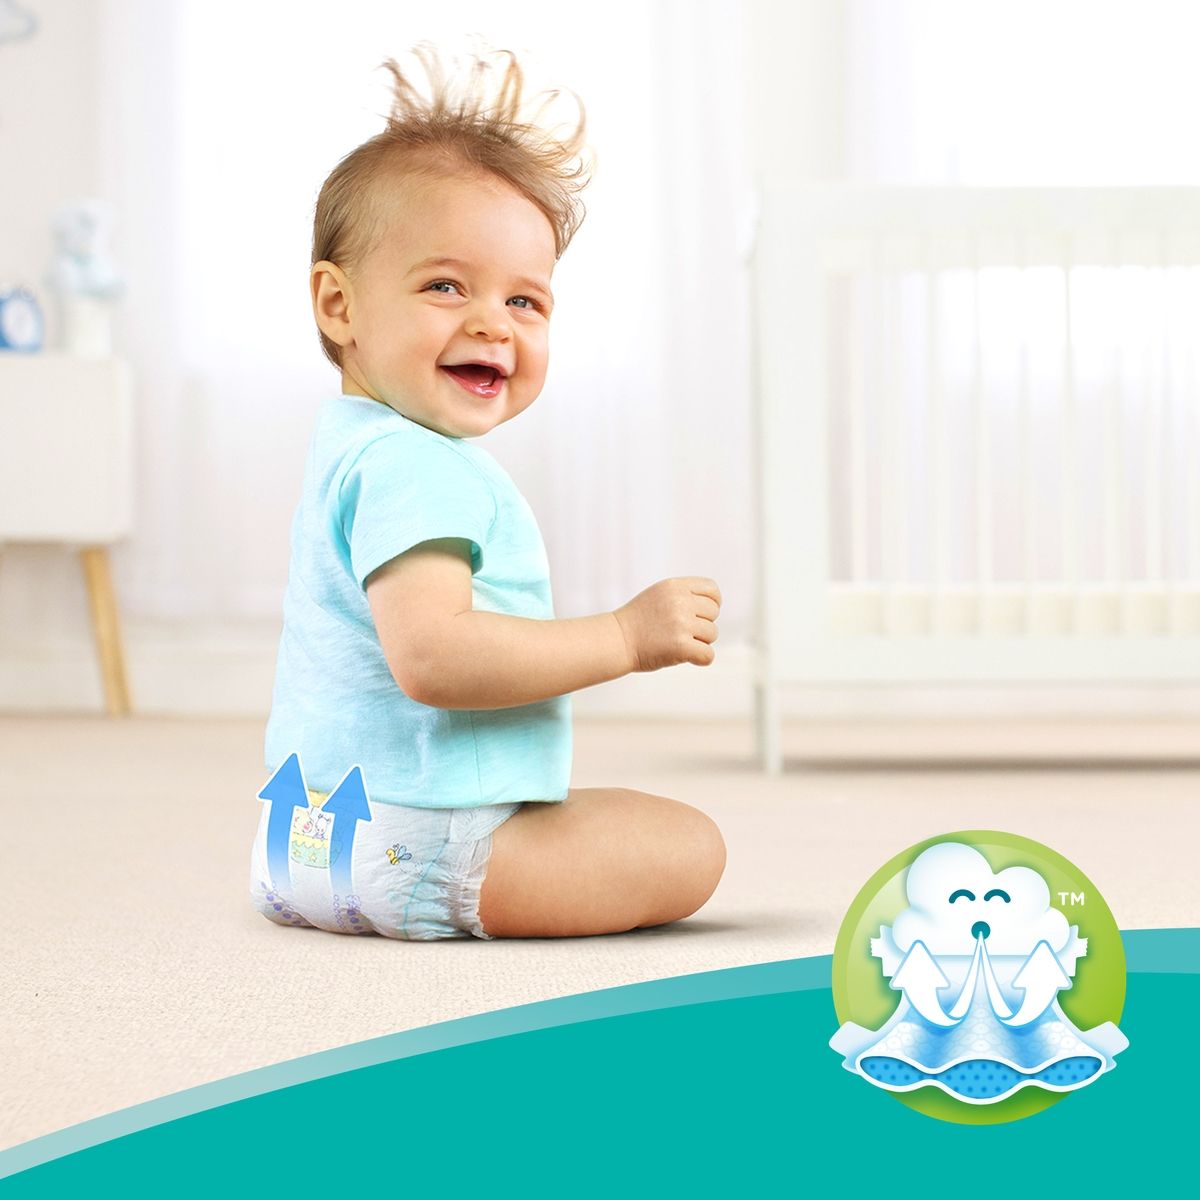 Pampers  Active Baby-Dry 9-16  ( 4+) 62 